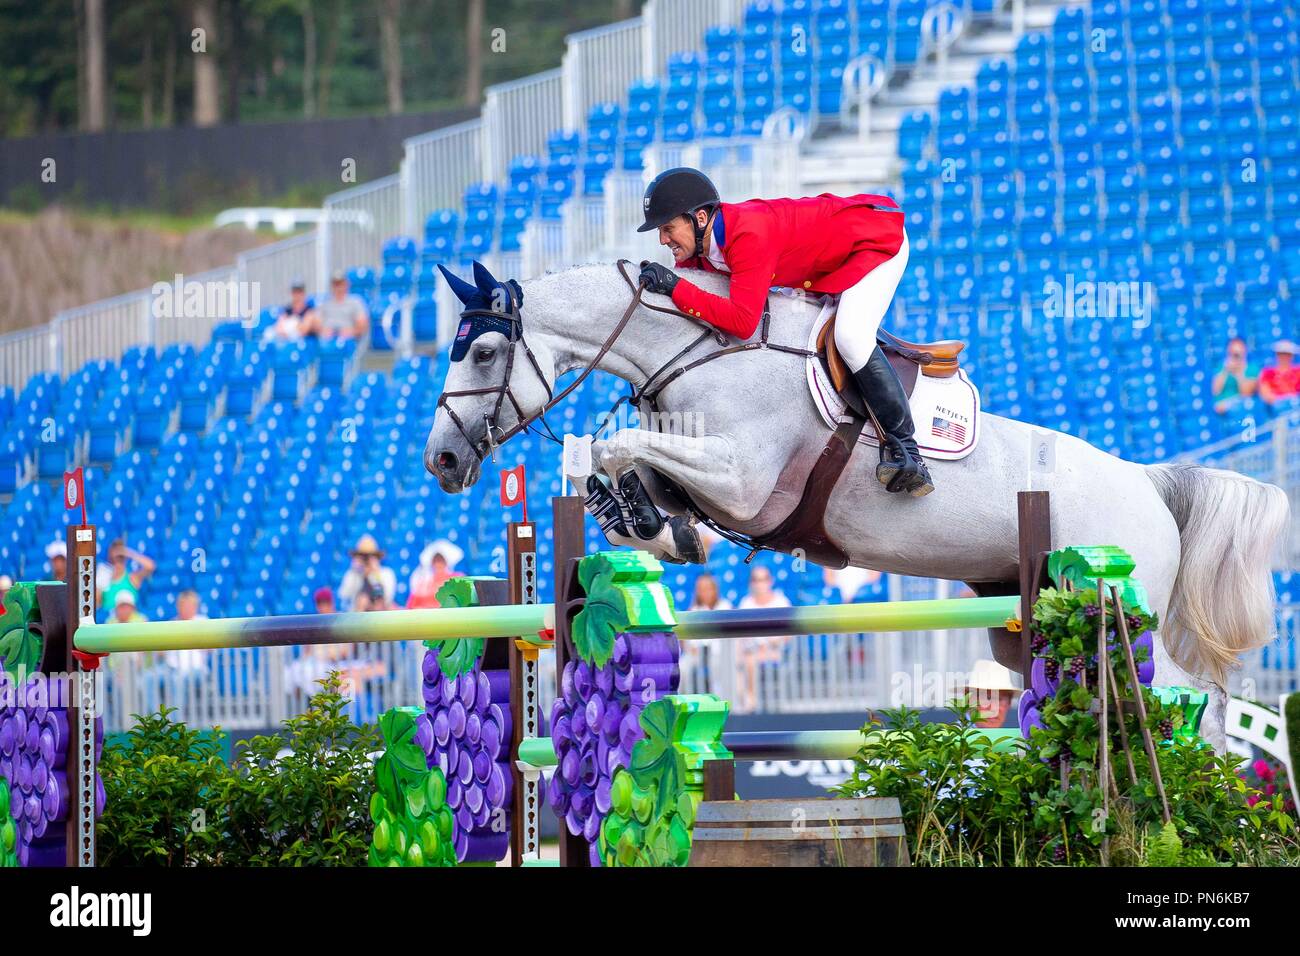 Tryon, California, USA. 19th Sept 2018. McLain Ward riding Clinta. USA. FEI World Team & Individual Jumping Championships. First Competition. 1.55m. Table C. Day 8. World Equestrian Games. WEG 2018 Tryon. North Carolina. USA. 19/09/2018. Credit: Sport In Pictures/Alamy Live News Stock Photo